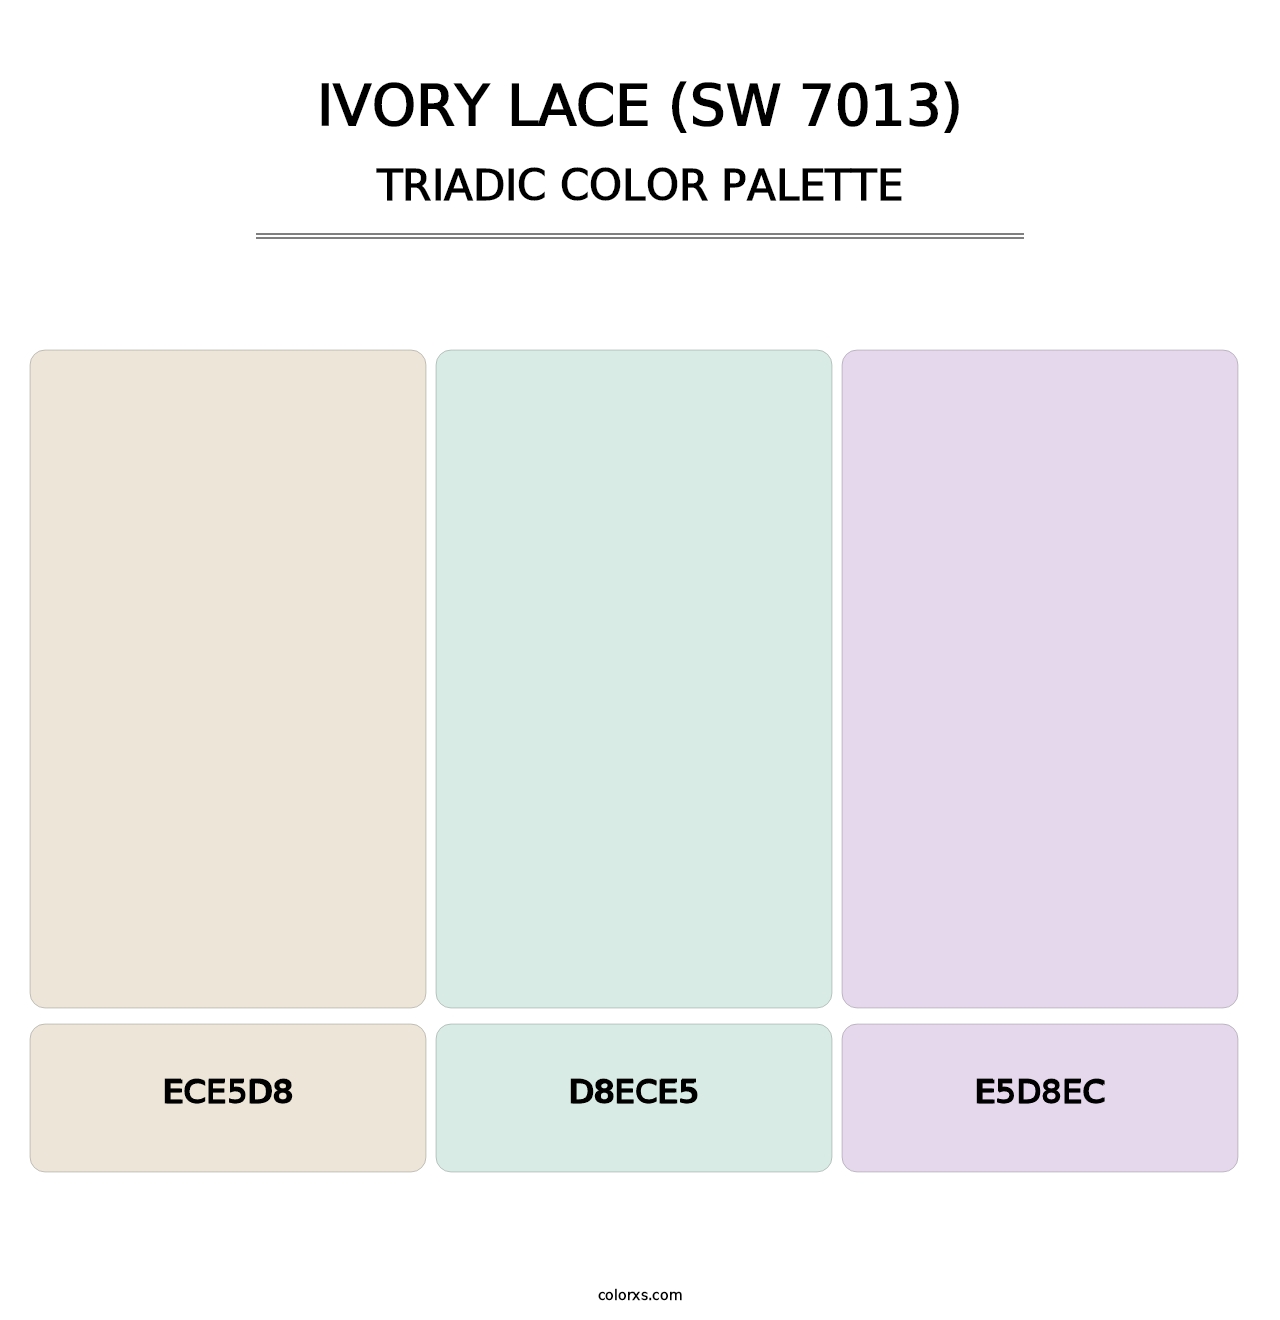 Ivory Lace (SW 7013) - Triadic Color Palette